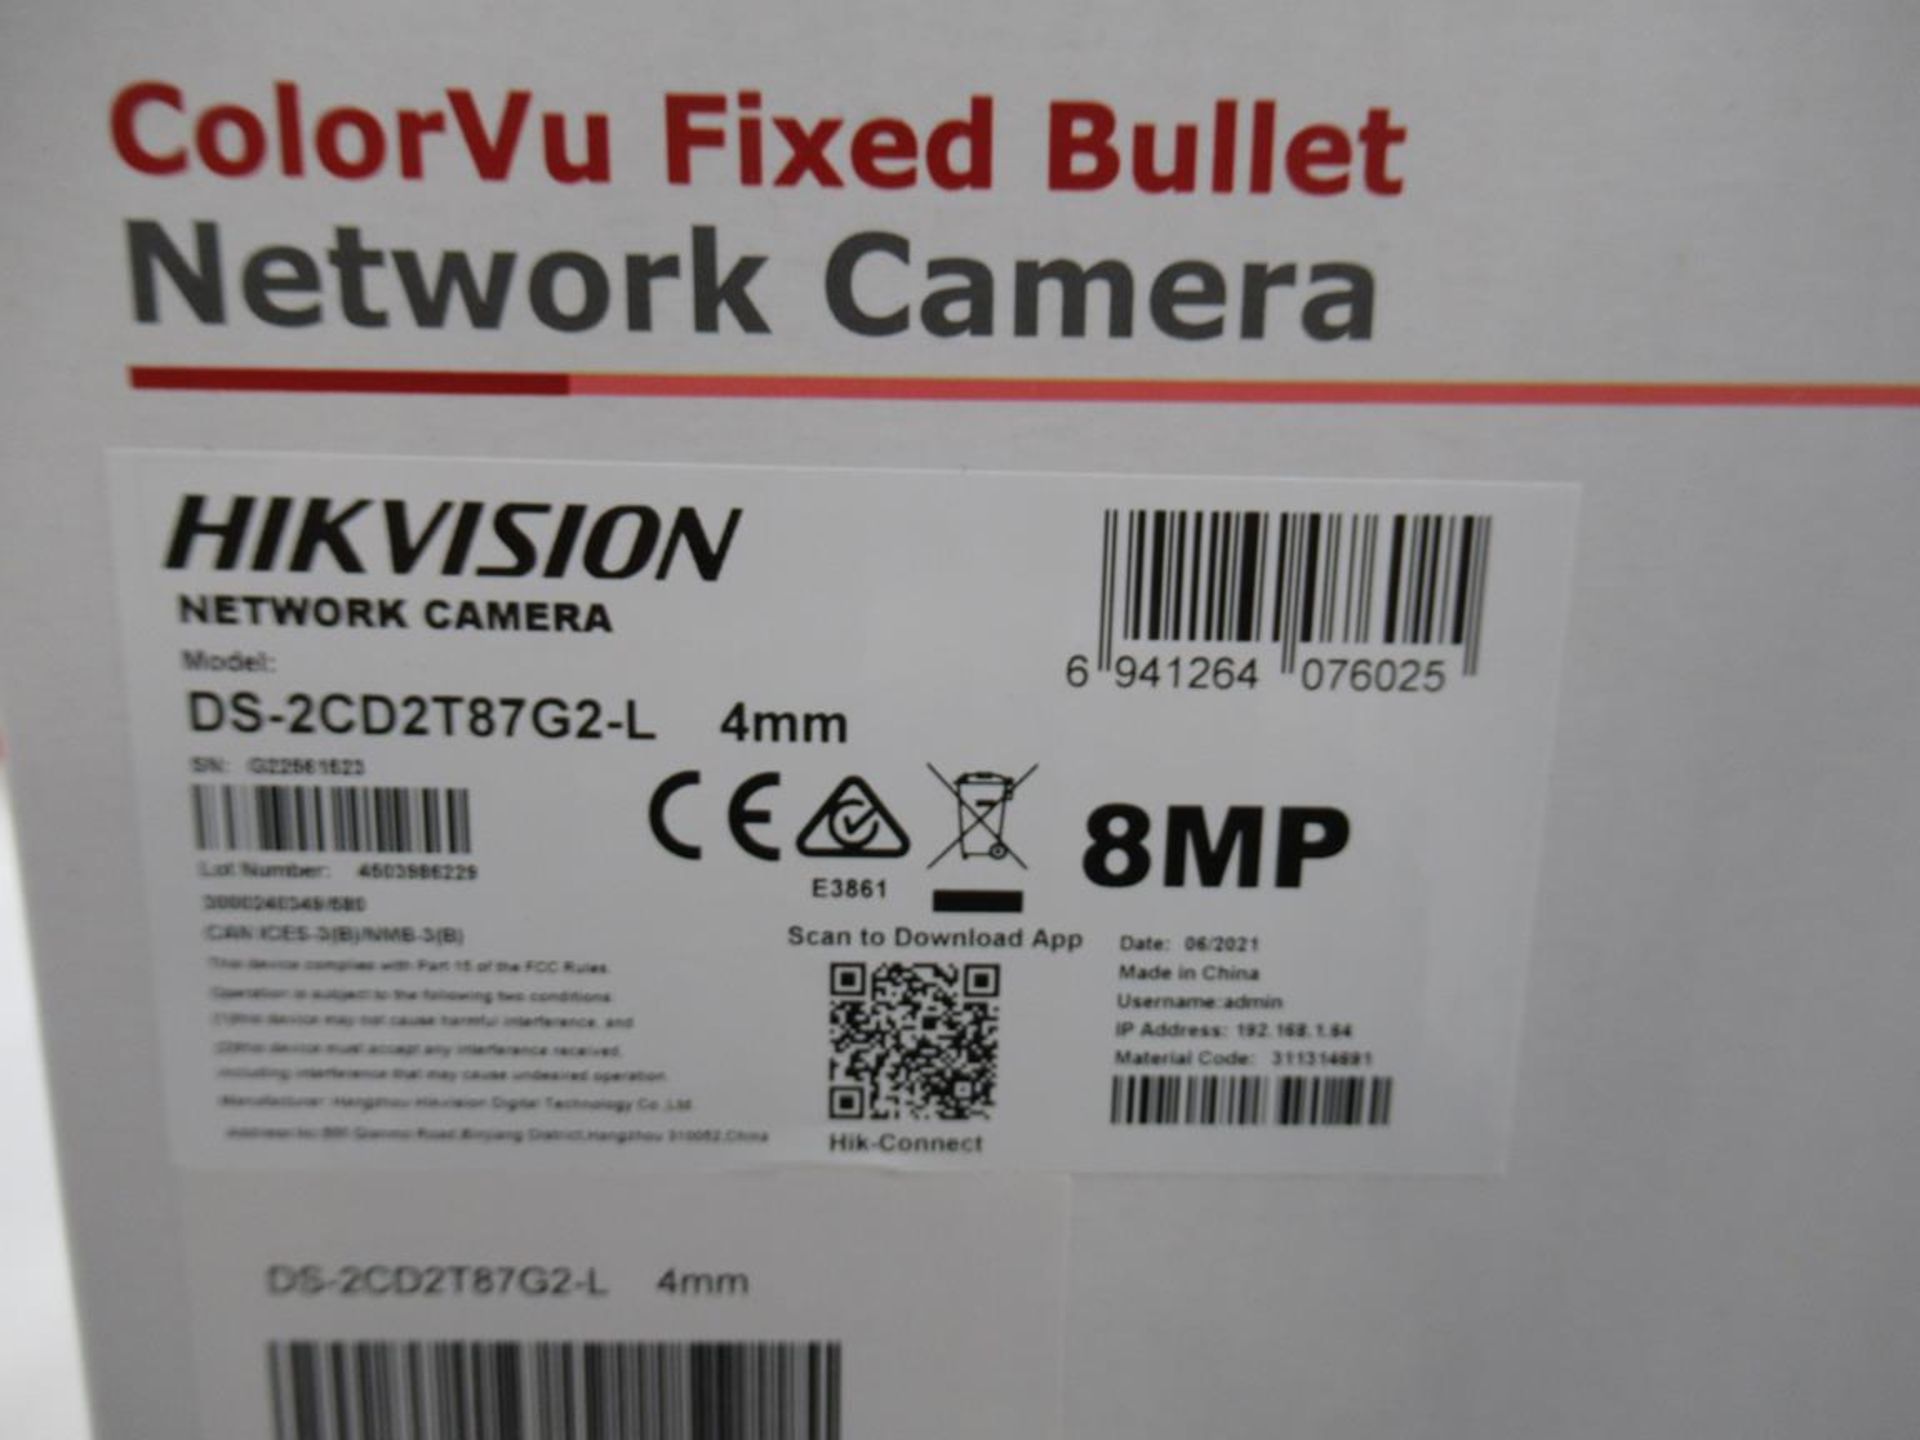 11x (no.) Hik Vision, Colorvu DS-2CD2T87G2-L (8MP) fixed bullet network cameras (boxed and unused) - Image 3 of 6